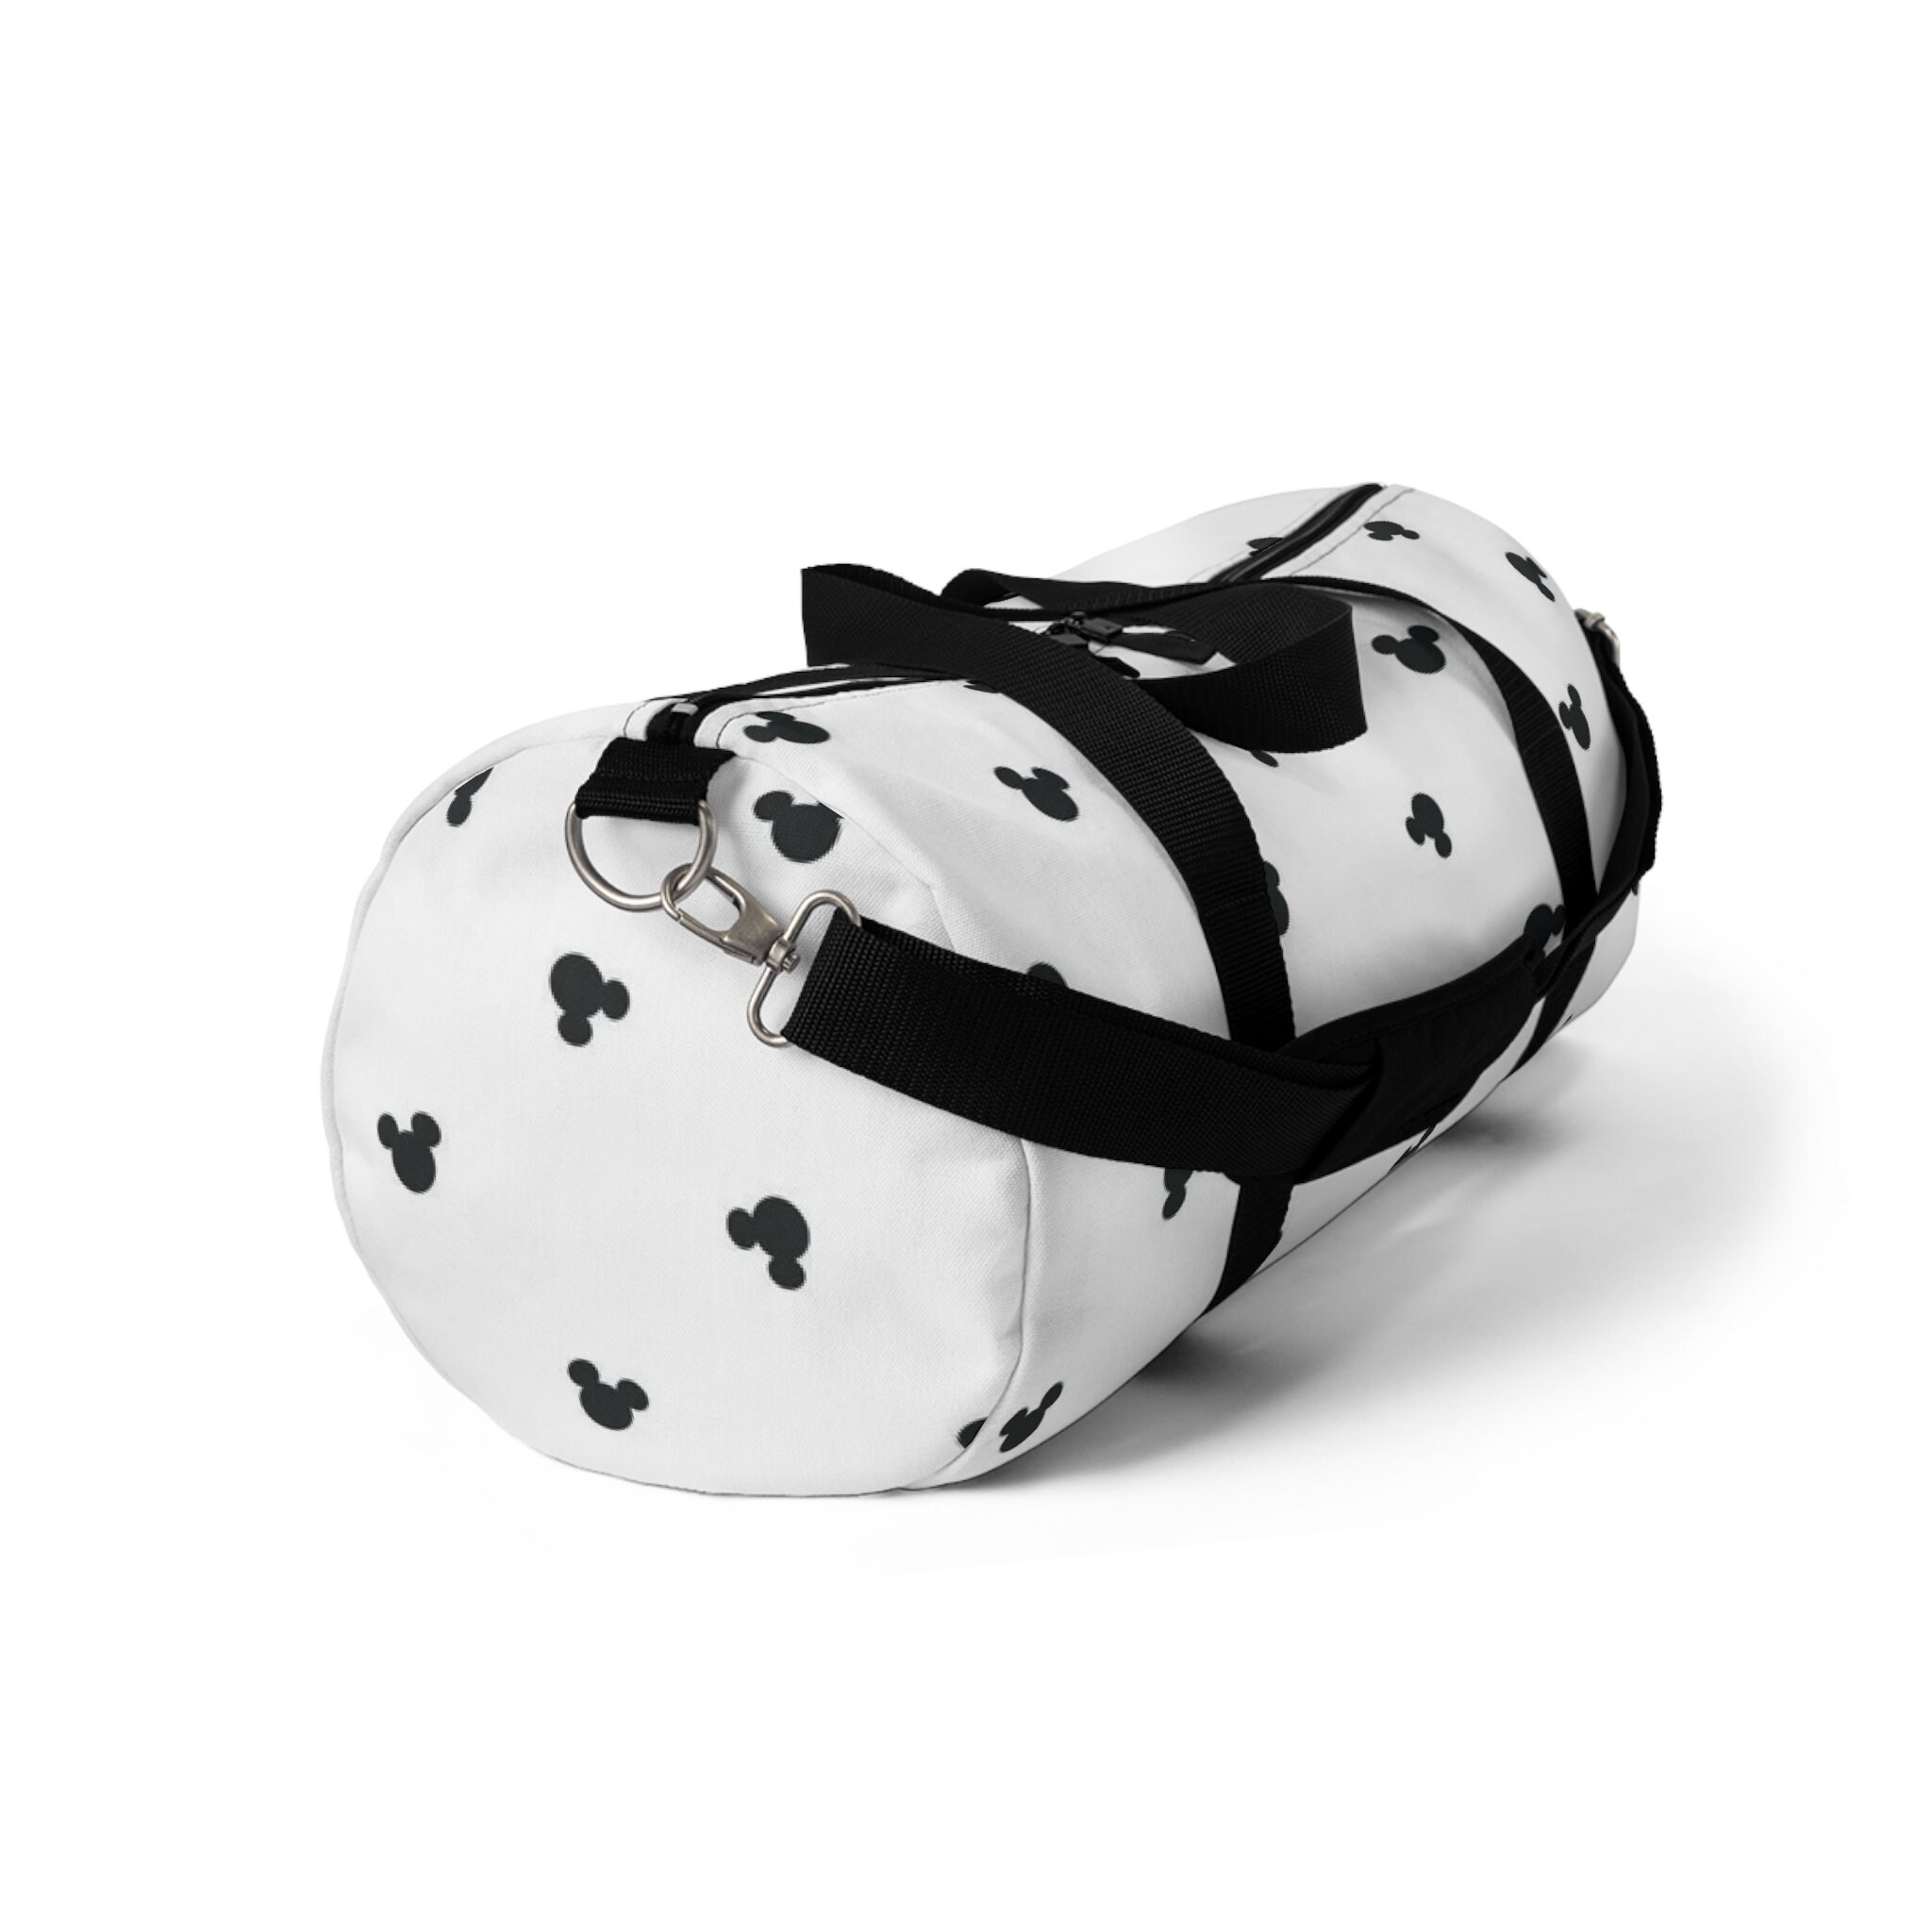 Discover Disney White and Black Mickey Mouse Duffel Bag